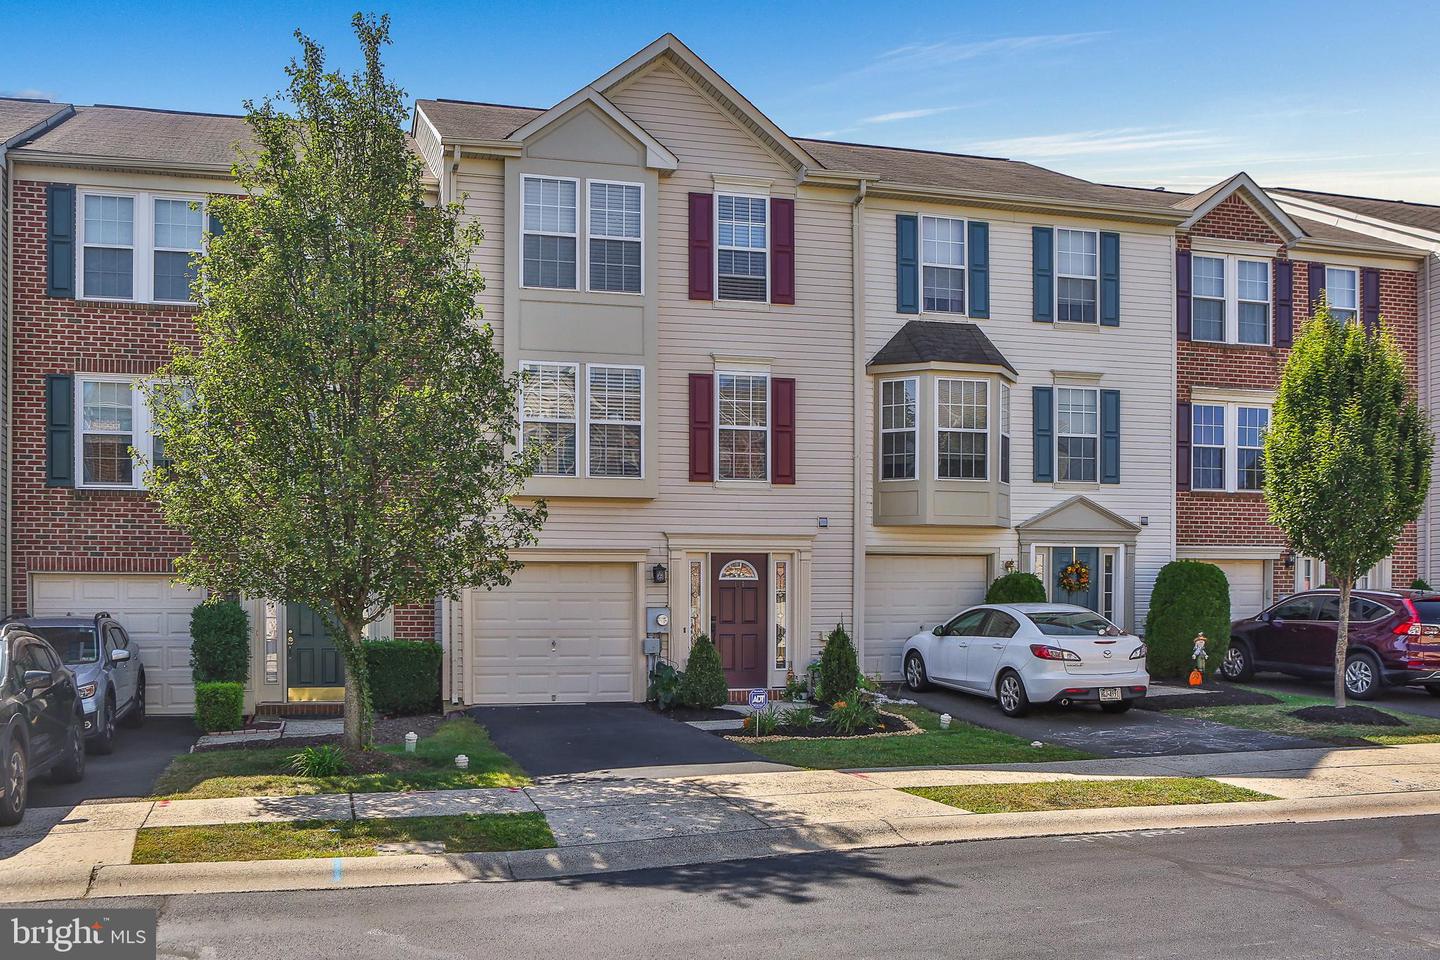 View North Wales, PA 19454 townhome